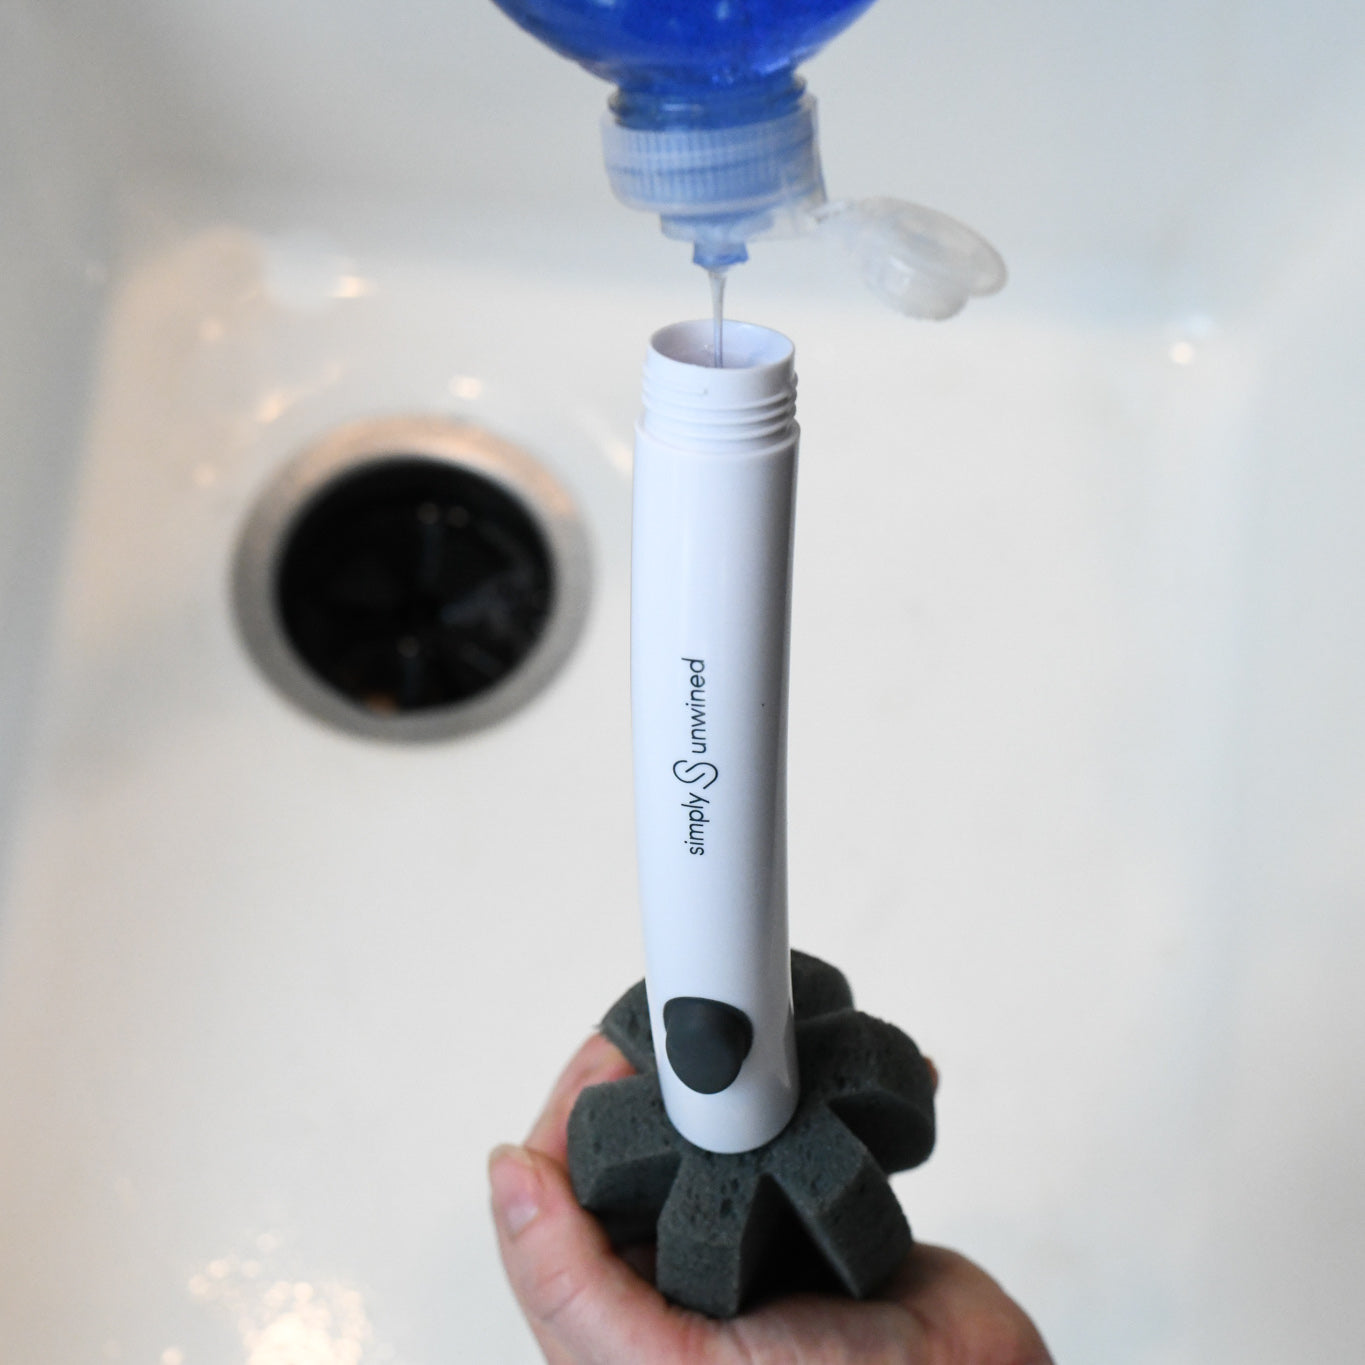 The WINE Brush is a soap dispensing glassware cleaning brush